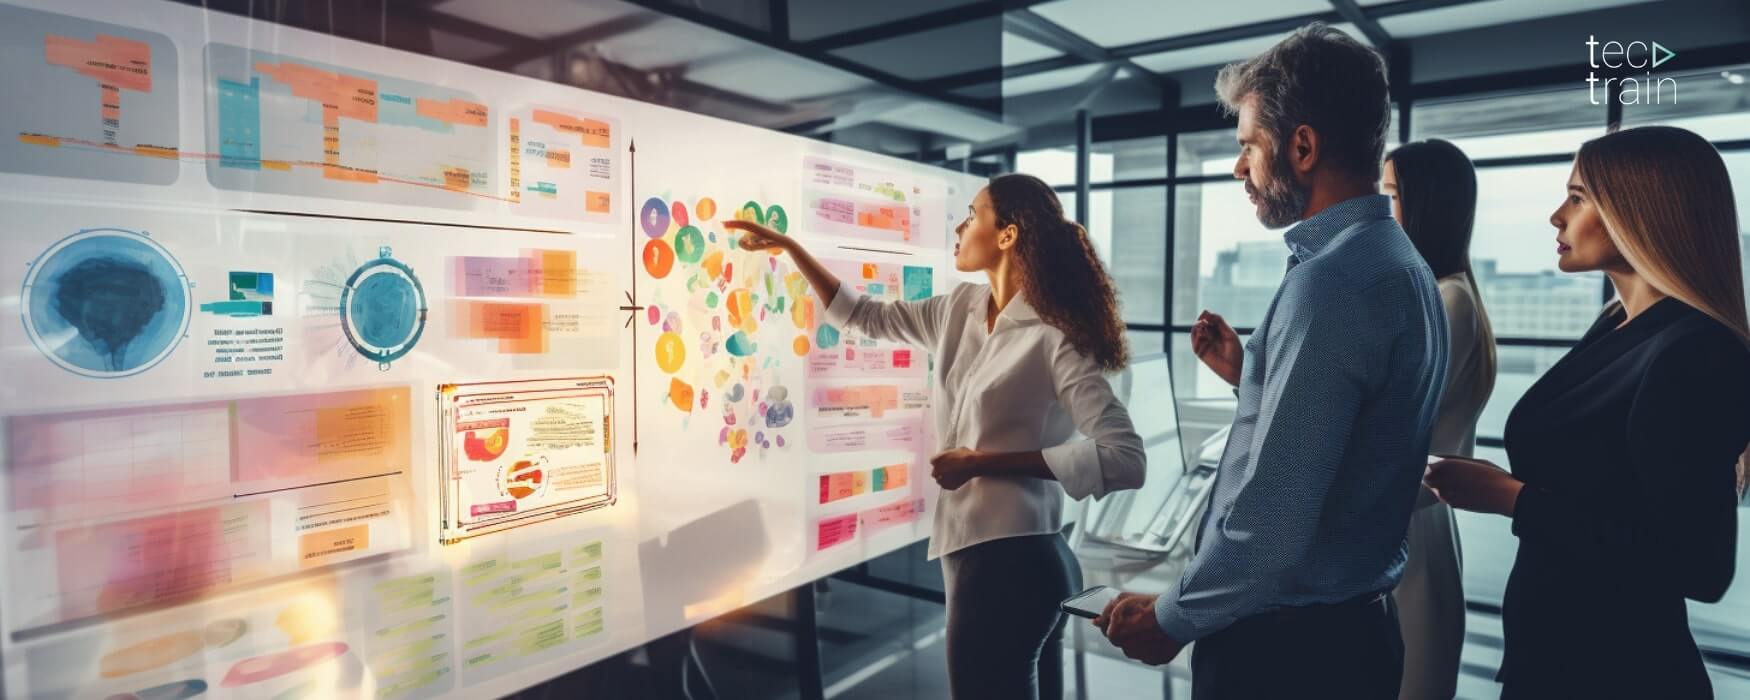 Creating value for customers should be one of the main goals. Presence of a well-trained, experienced, and competent workforce in the organization. Designing an agile organizational culture.